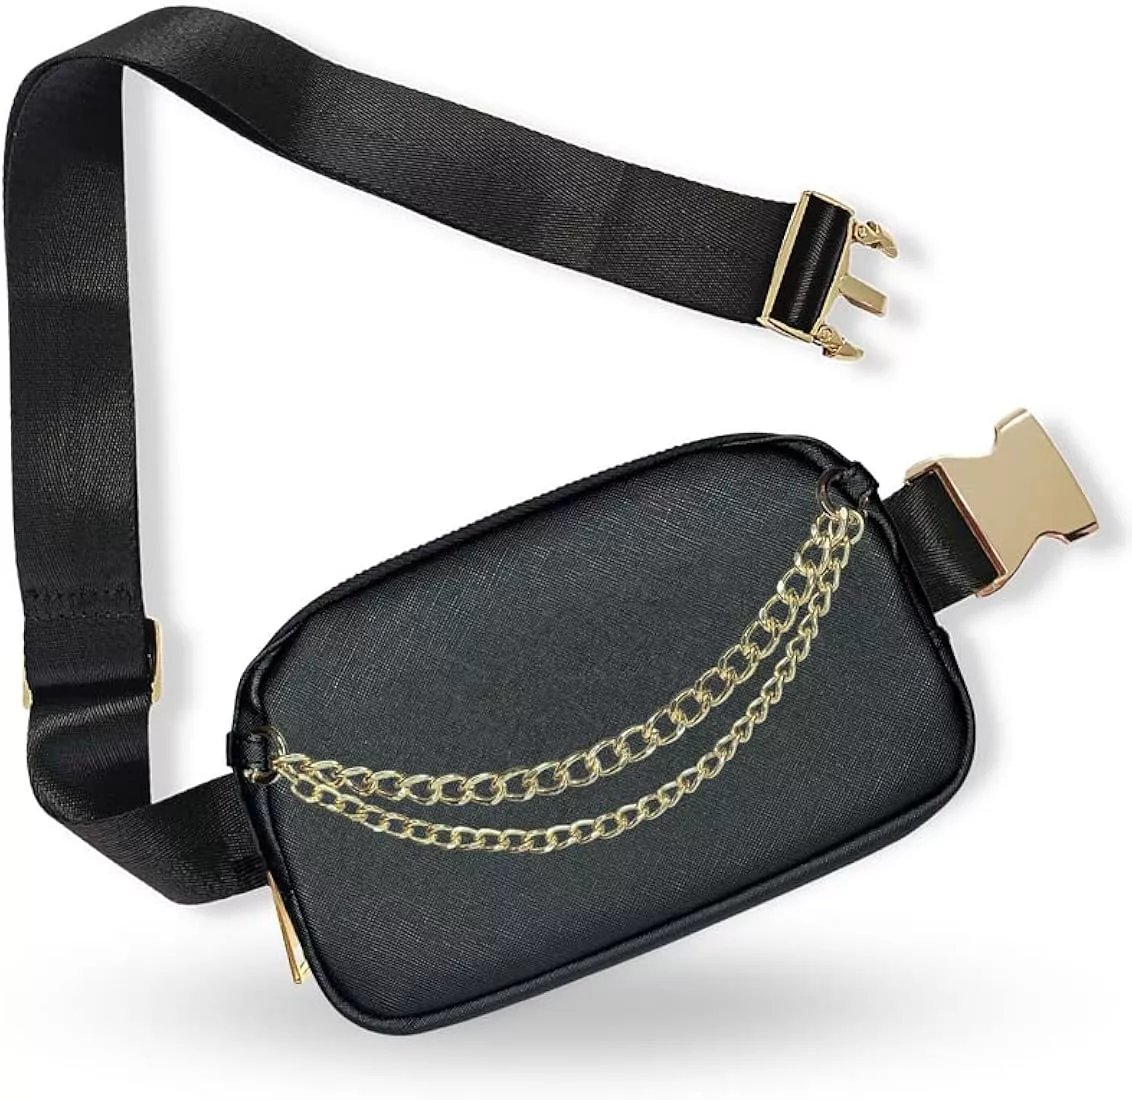 Boutique Luxury Chain Belt Bag | Crossbody Bag Leather Fanny Pack for Women  Fashionable | Cute Everywhere Bum Hip Waist Designer Pack | Small Travel